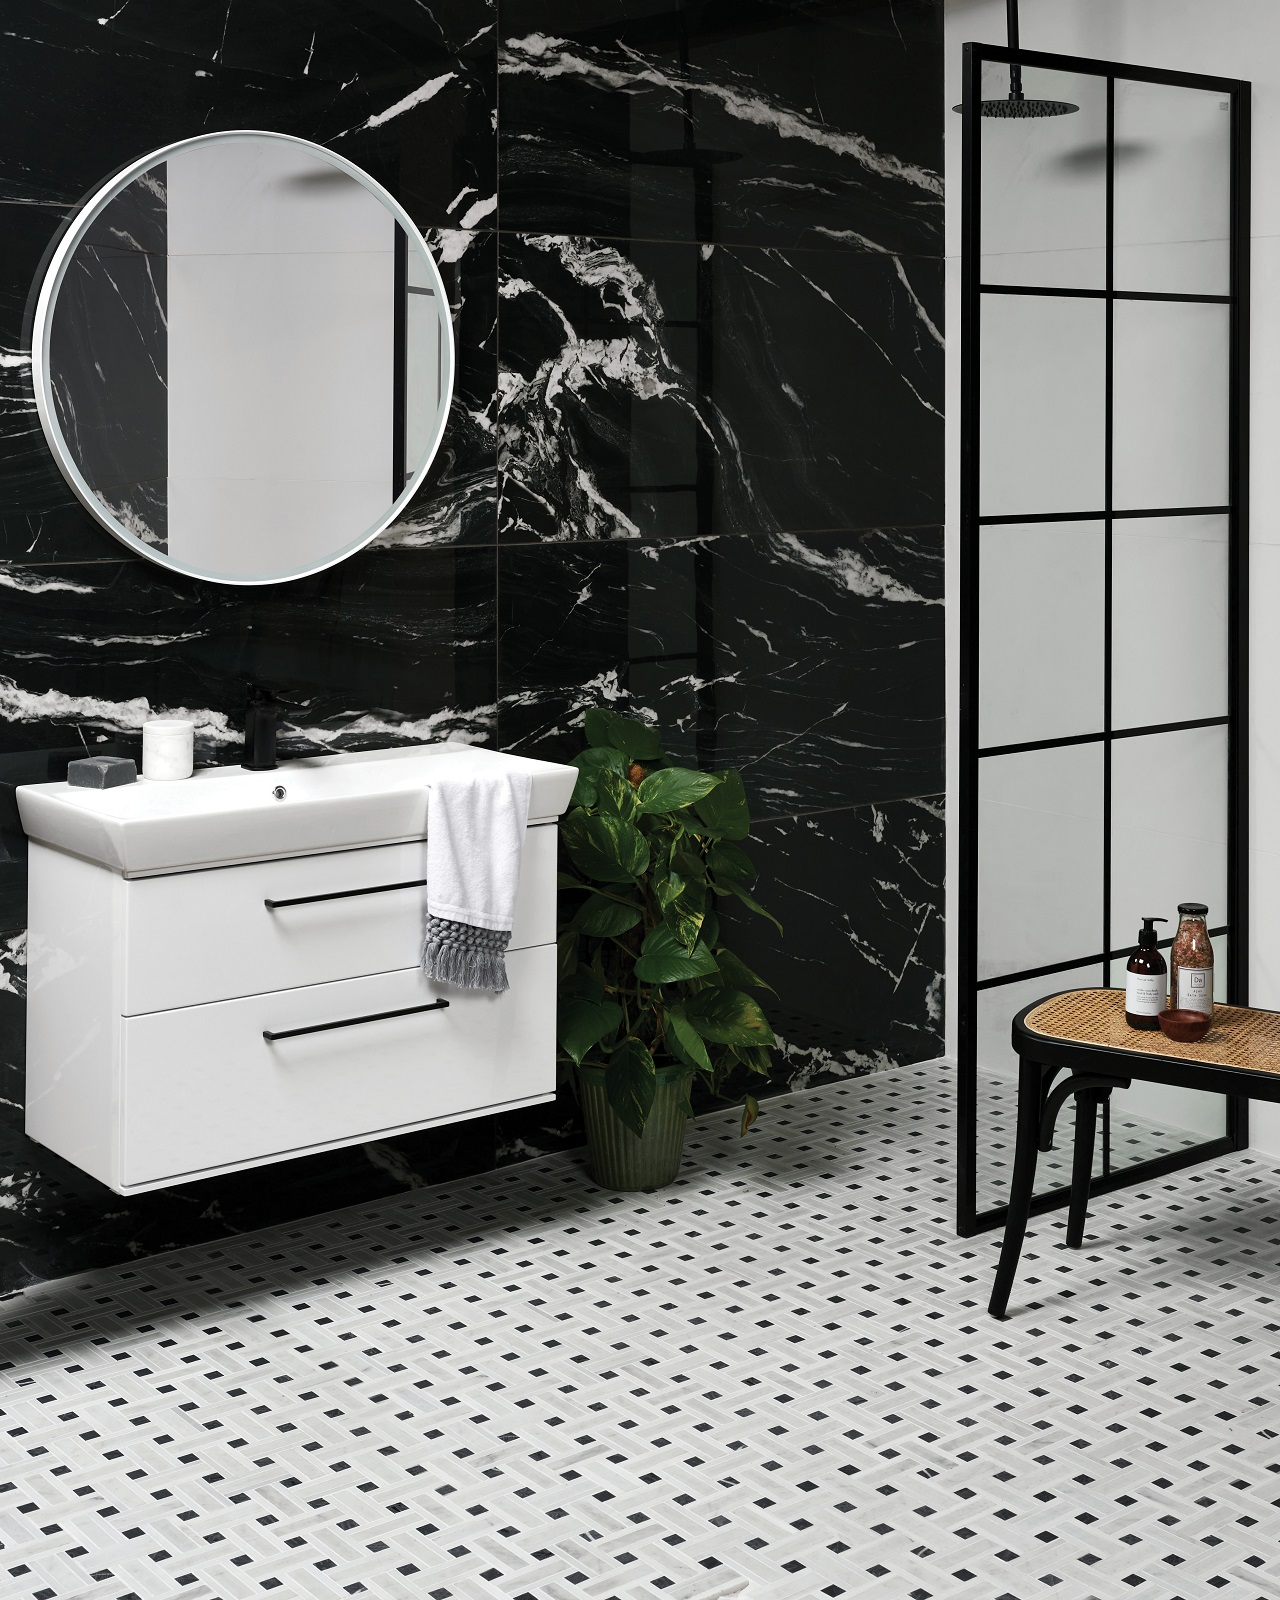 Lifestyle image of a bathroom featuring black marble wall tiles, black crittall framed shower enclosure and matt black brassware